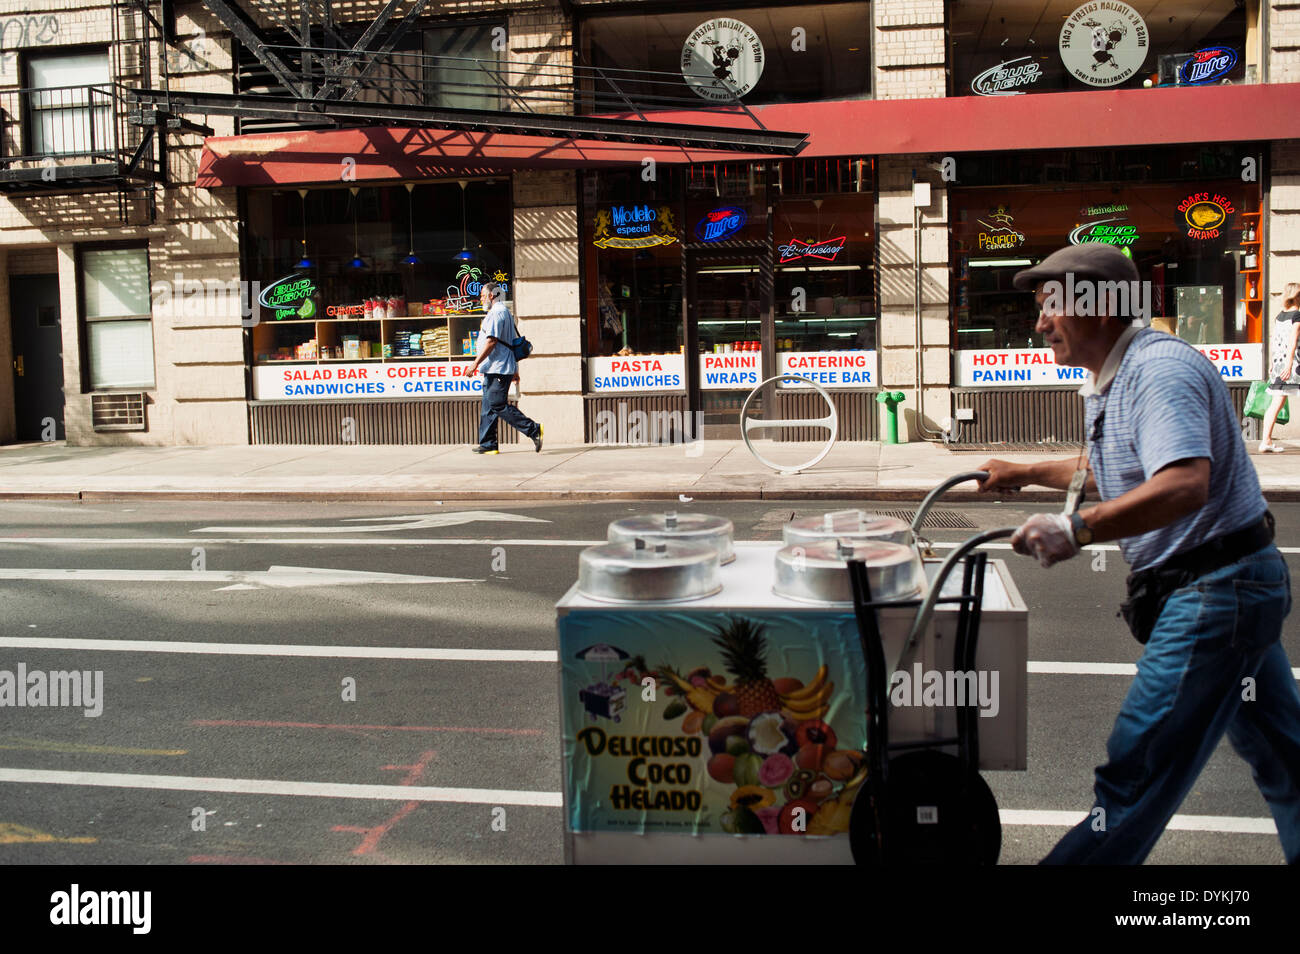 A man / food vendor pushing a push style food cart in Little Italy, New York City Stock Photo